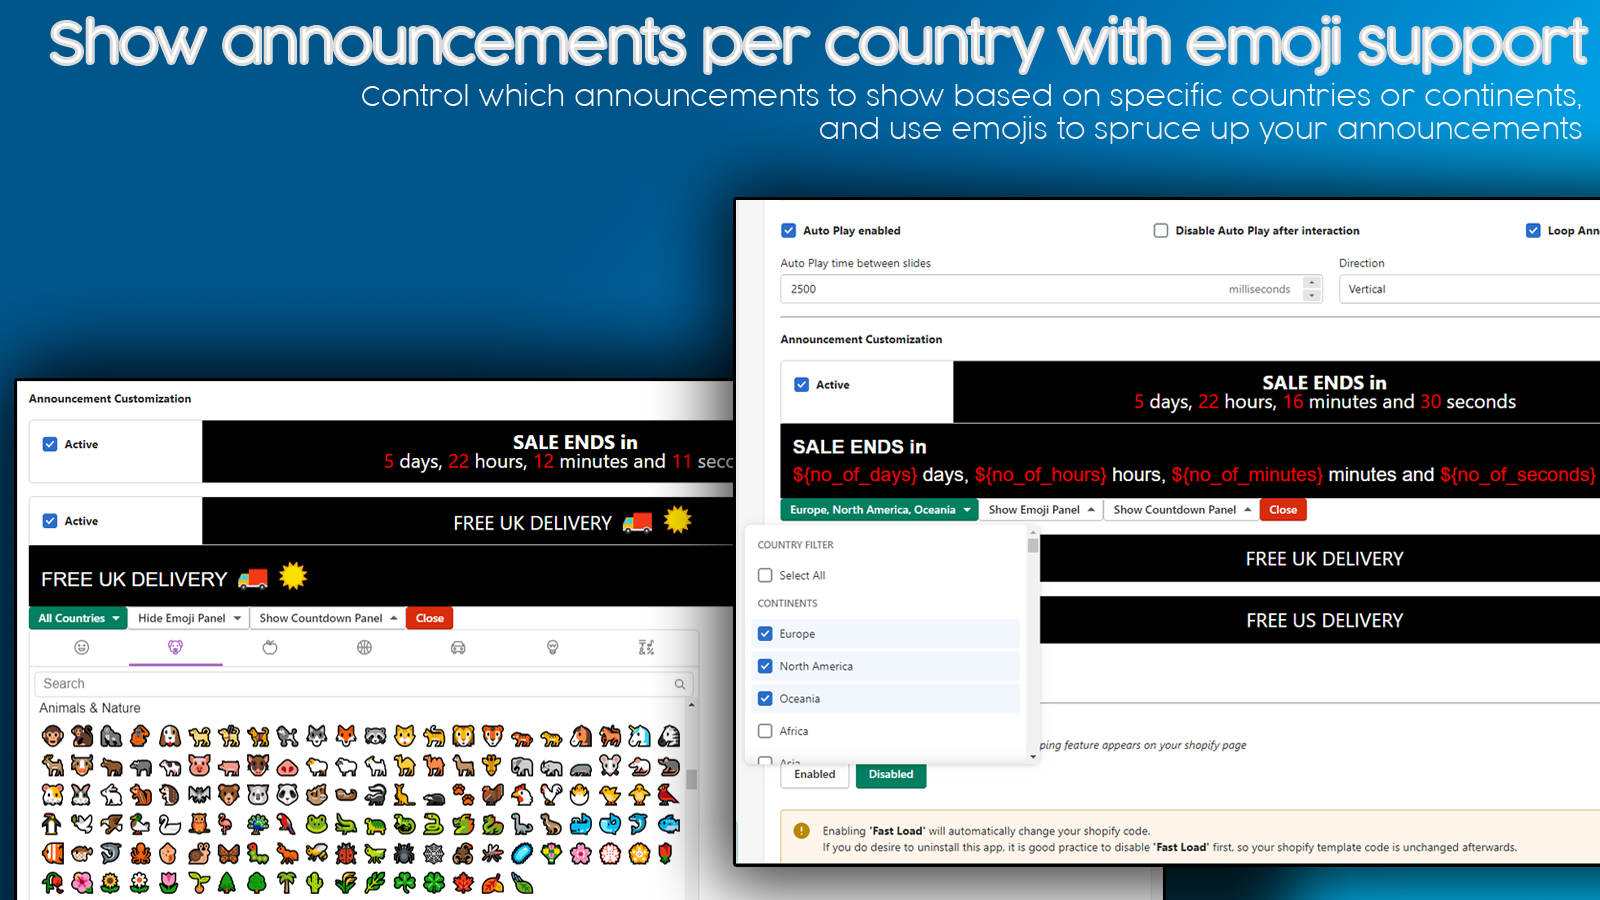 Show announcements per country with emoji support